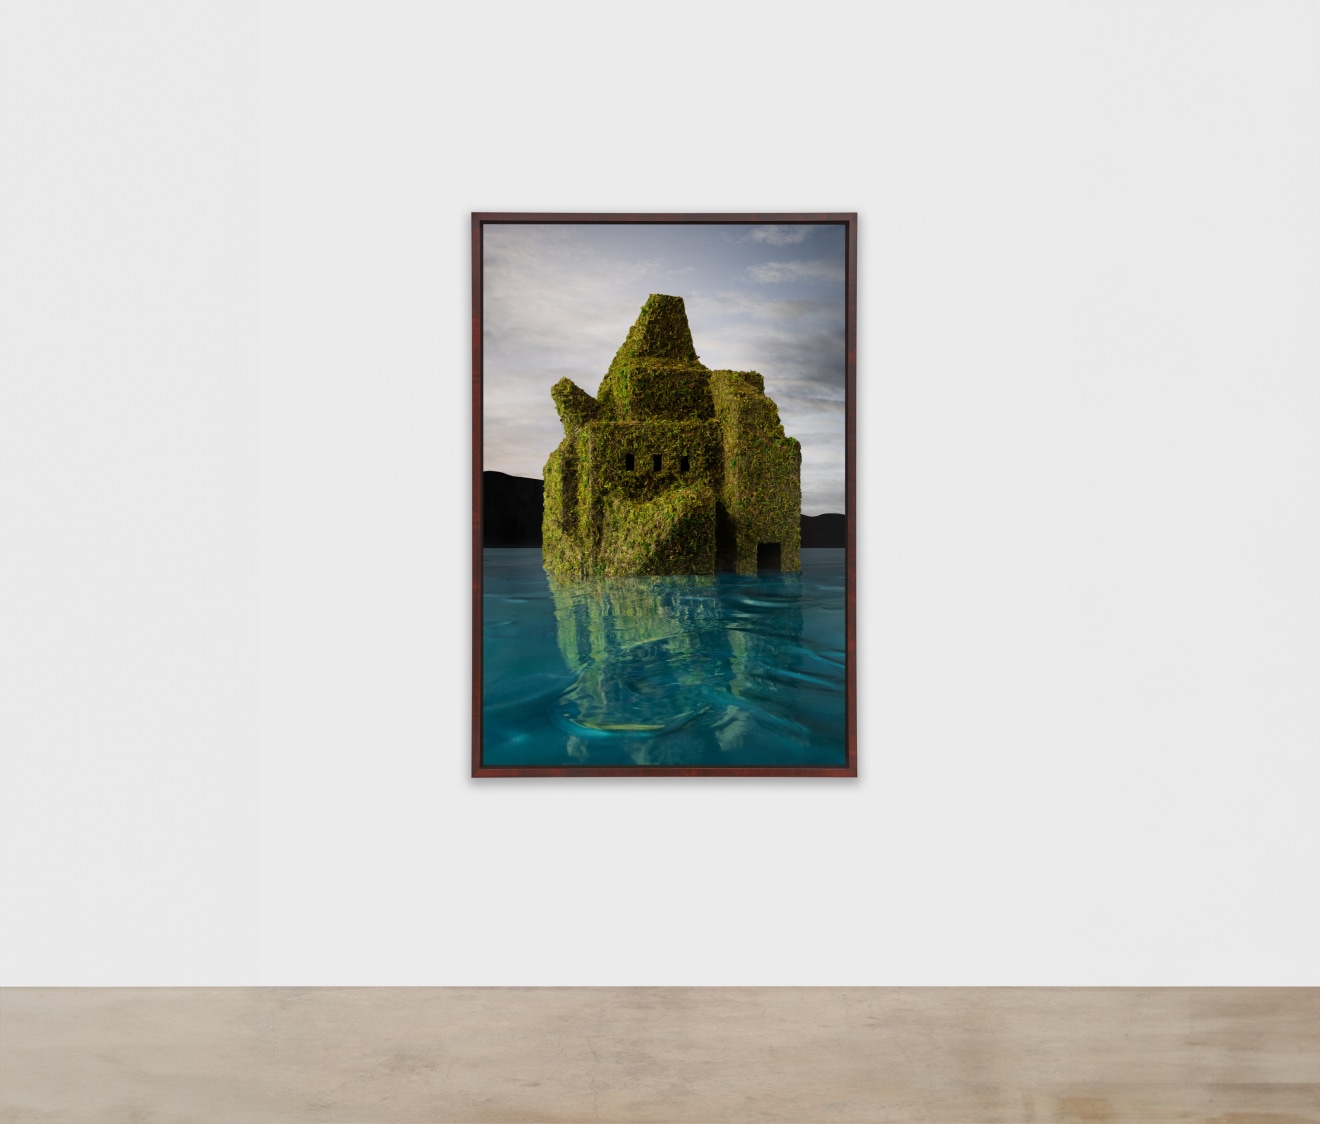 James Casebere,&nbsp;Greenhouse, 2024, framed archival pigment print mounted to Dibond, paper: 66 3/4 x 44 1/2 inches, framed: 69 9/16 x 47 5/16 x 2 1/4 inches &copy; James&nbsp;Casebere Courtesy: the artist and Sean Kelly, New York/Los Angeles